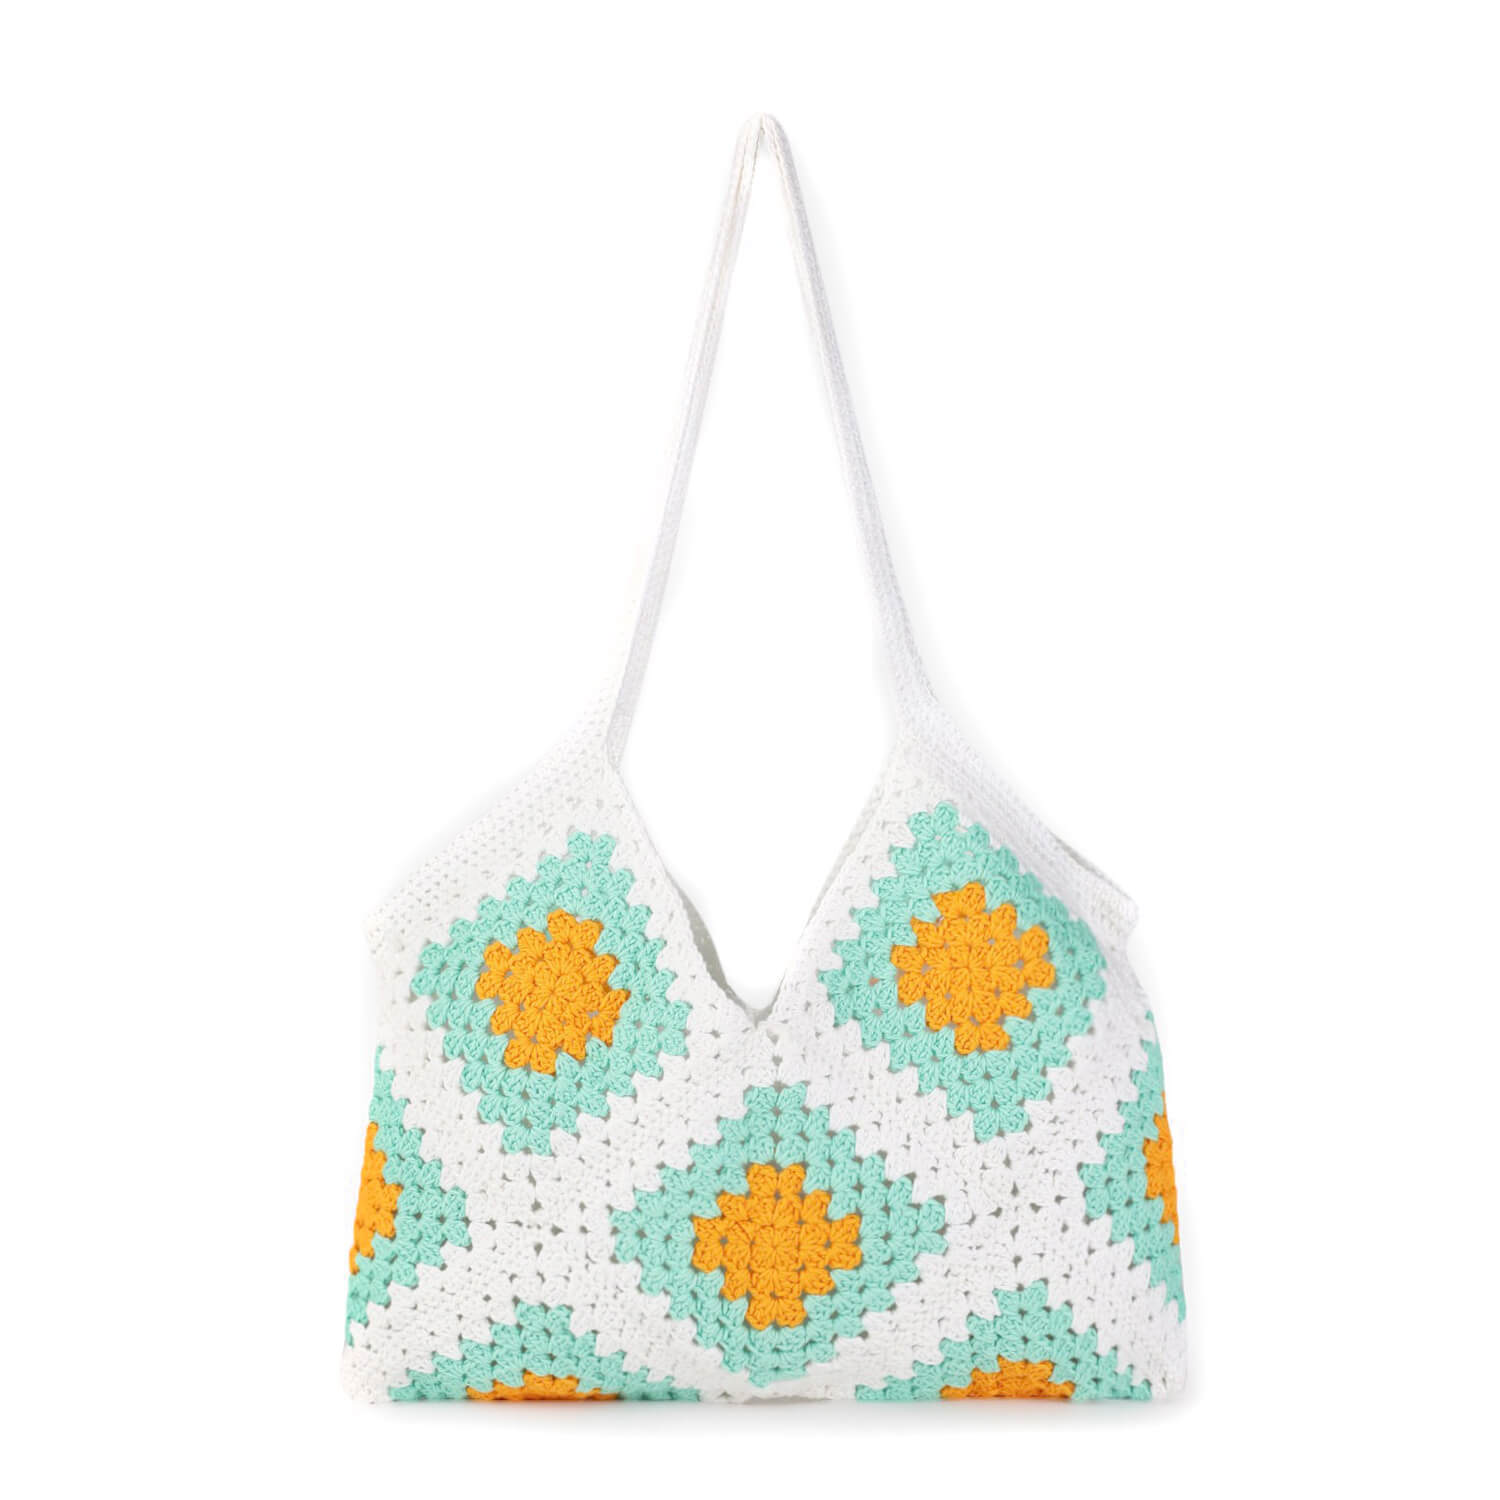 Buy Granny Square Crochet Bag Multicolored Granny Square Tiles With Bamboo  Handles, Crochet. Online in India 